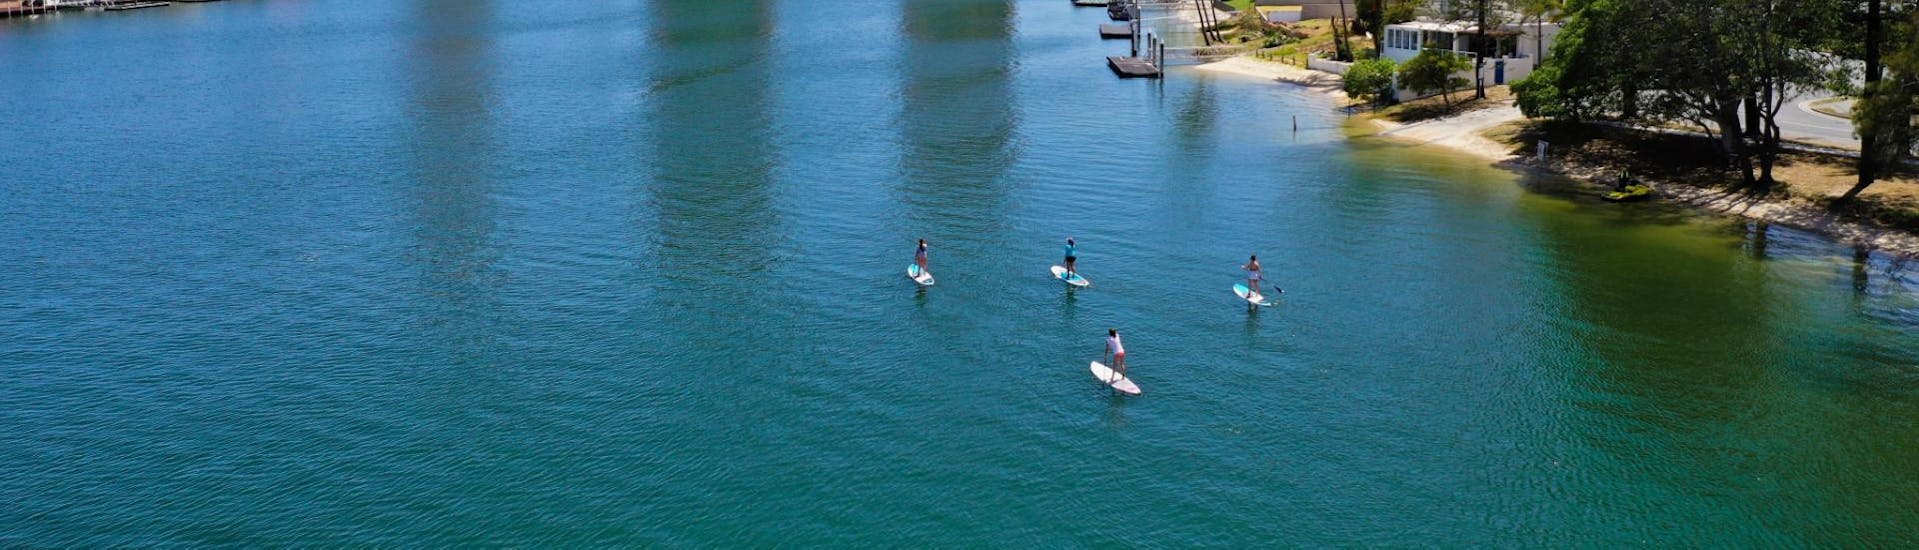 Stand up Paddle Boarding Hire in Gold Coast.